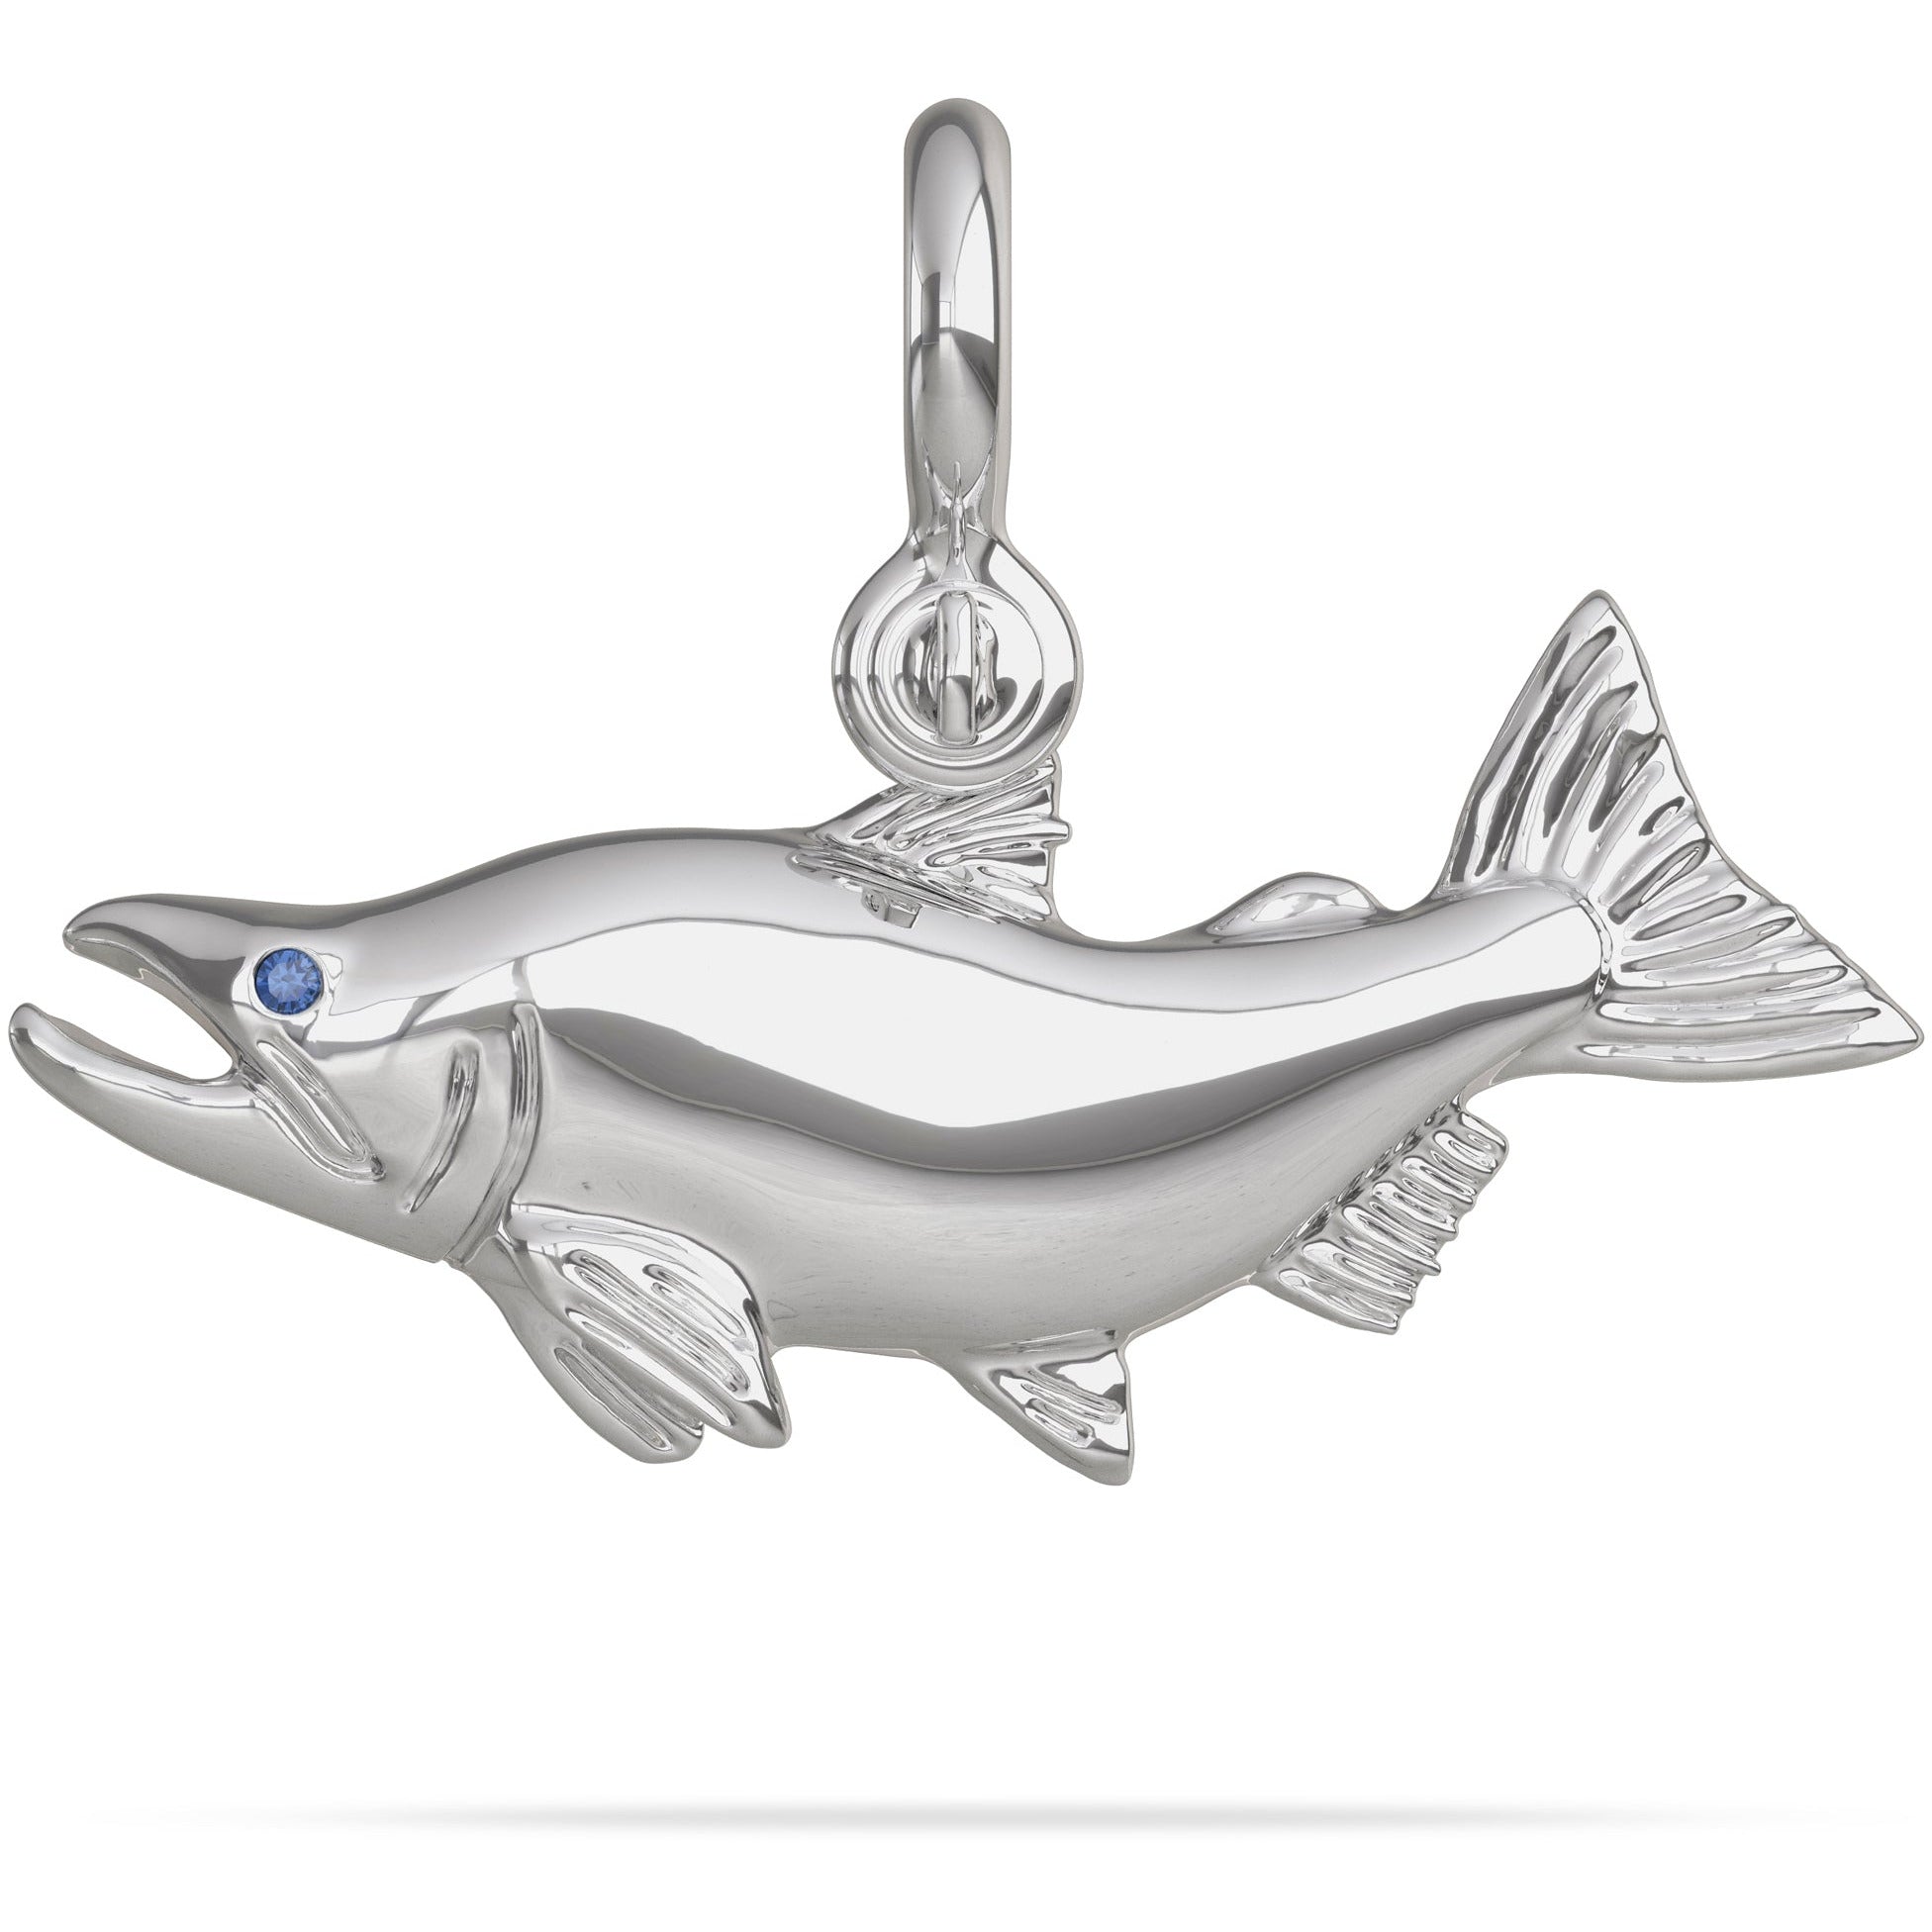 Sterling Silver Sockeye Salmon  Pendant High Polished Mirror Finish With Blue Sapphire Eye with A Mariner Shackle Bail Custom Designed By Nautical Treasure Jewelry In The Florida Keys Fly Fishing